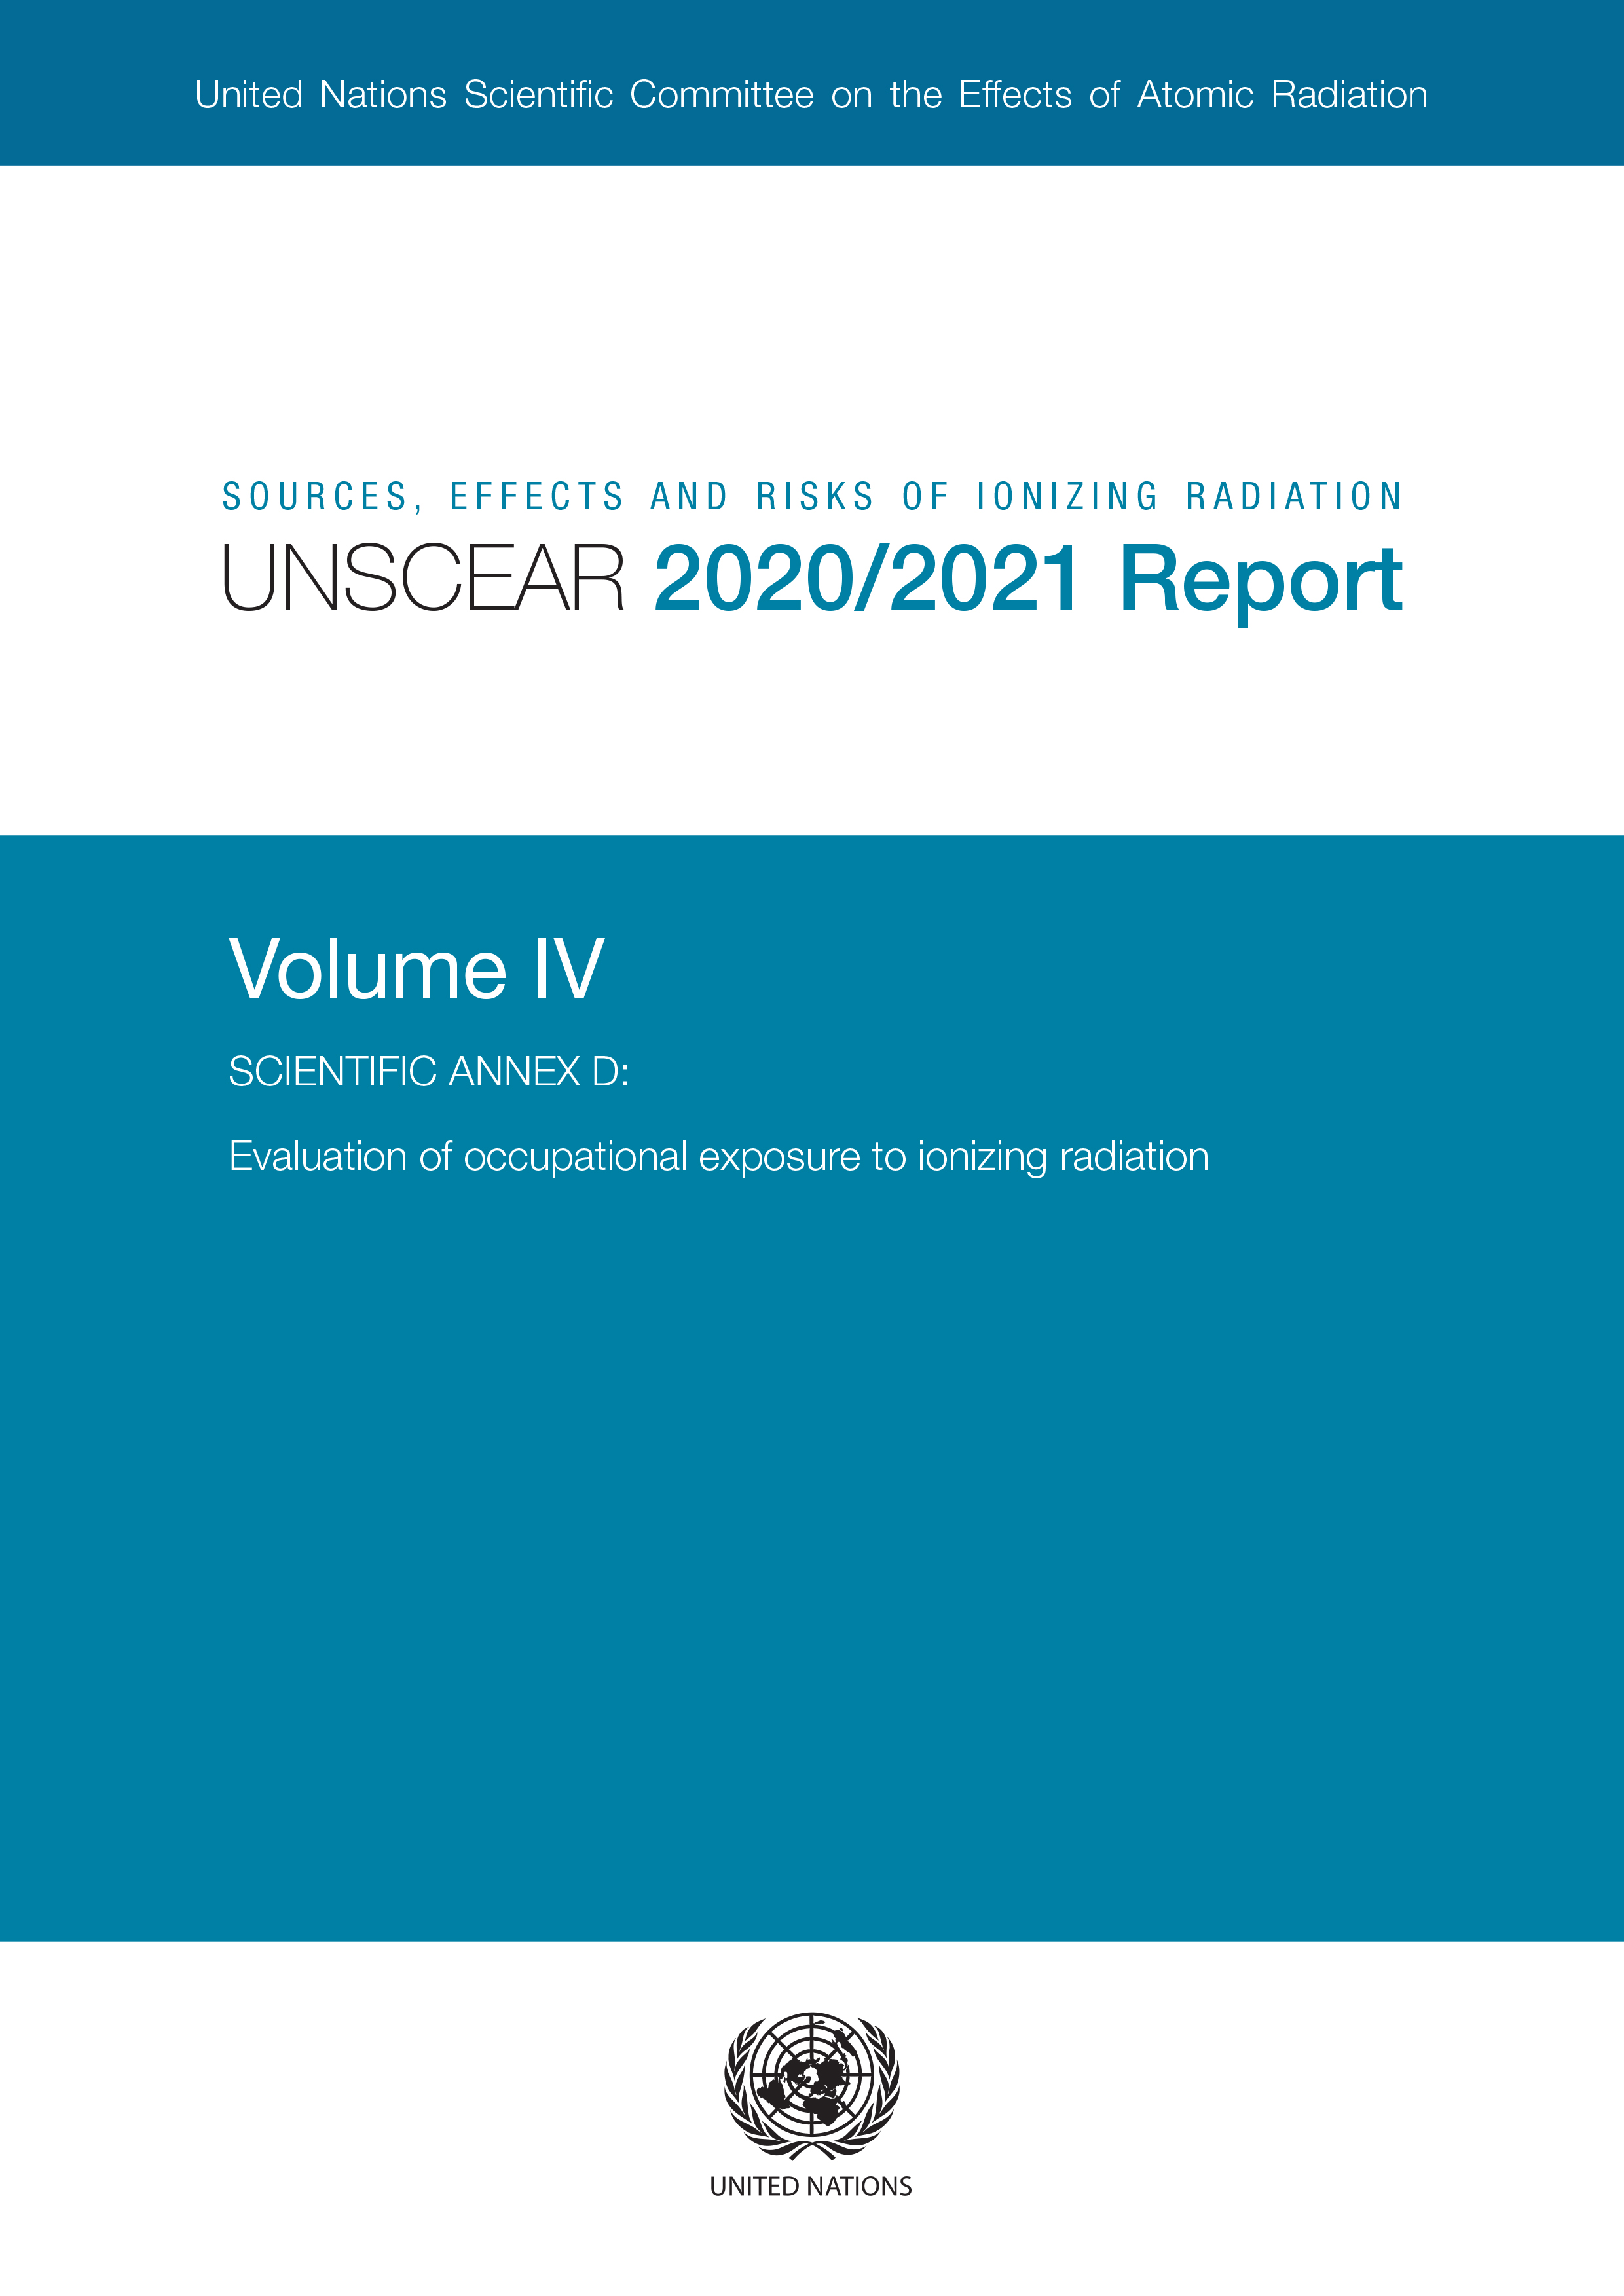 image of Sources, Effects and Risks of Ionizing Radiation, United Nations Scientific Committee on the Effects of Atomic Radiation (UNSCEAR) 2020/2021 Report, Volume IV